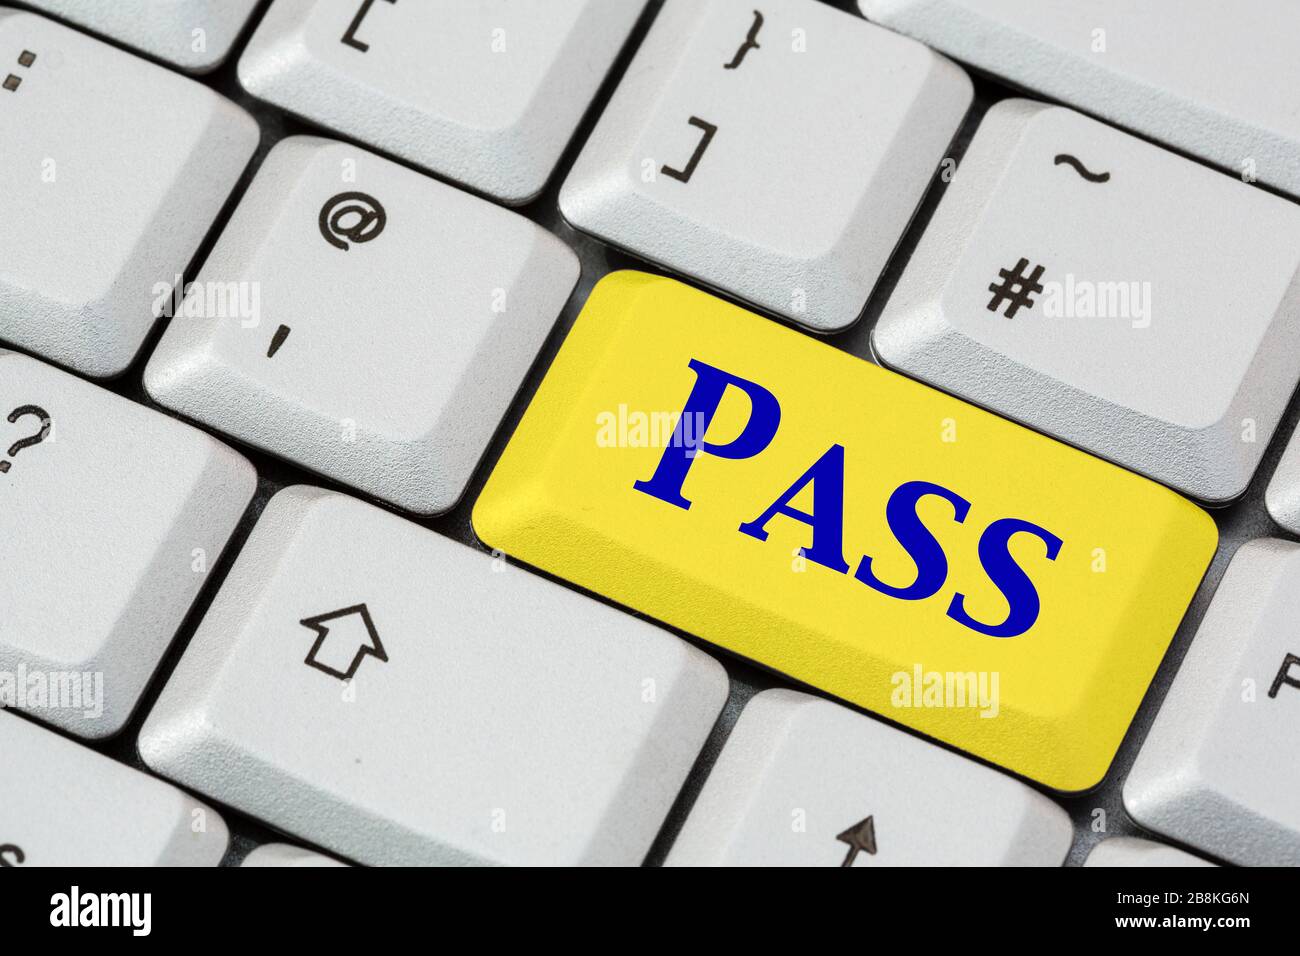 A keyboard with the word PASS in blue lettering on a yellow enter key. Exam concept. England, UK, Britain Stock Photo